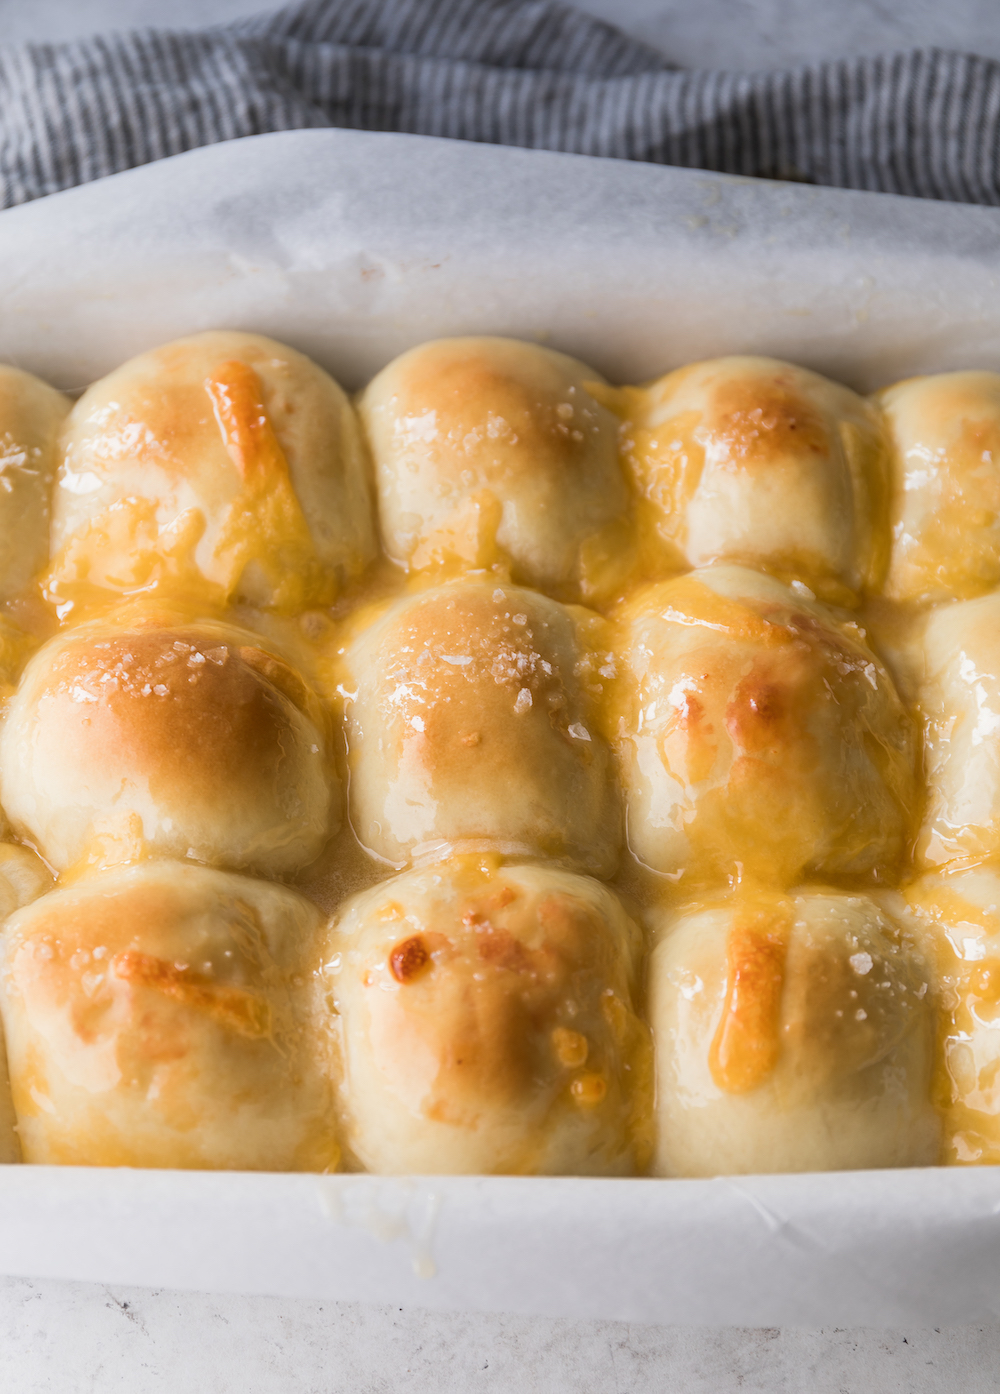 A close up shot of some yummy dinner rolls.